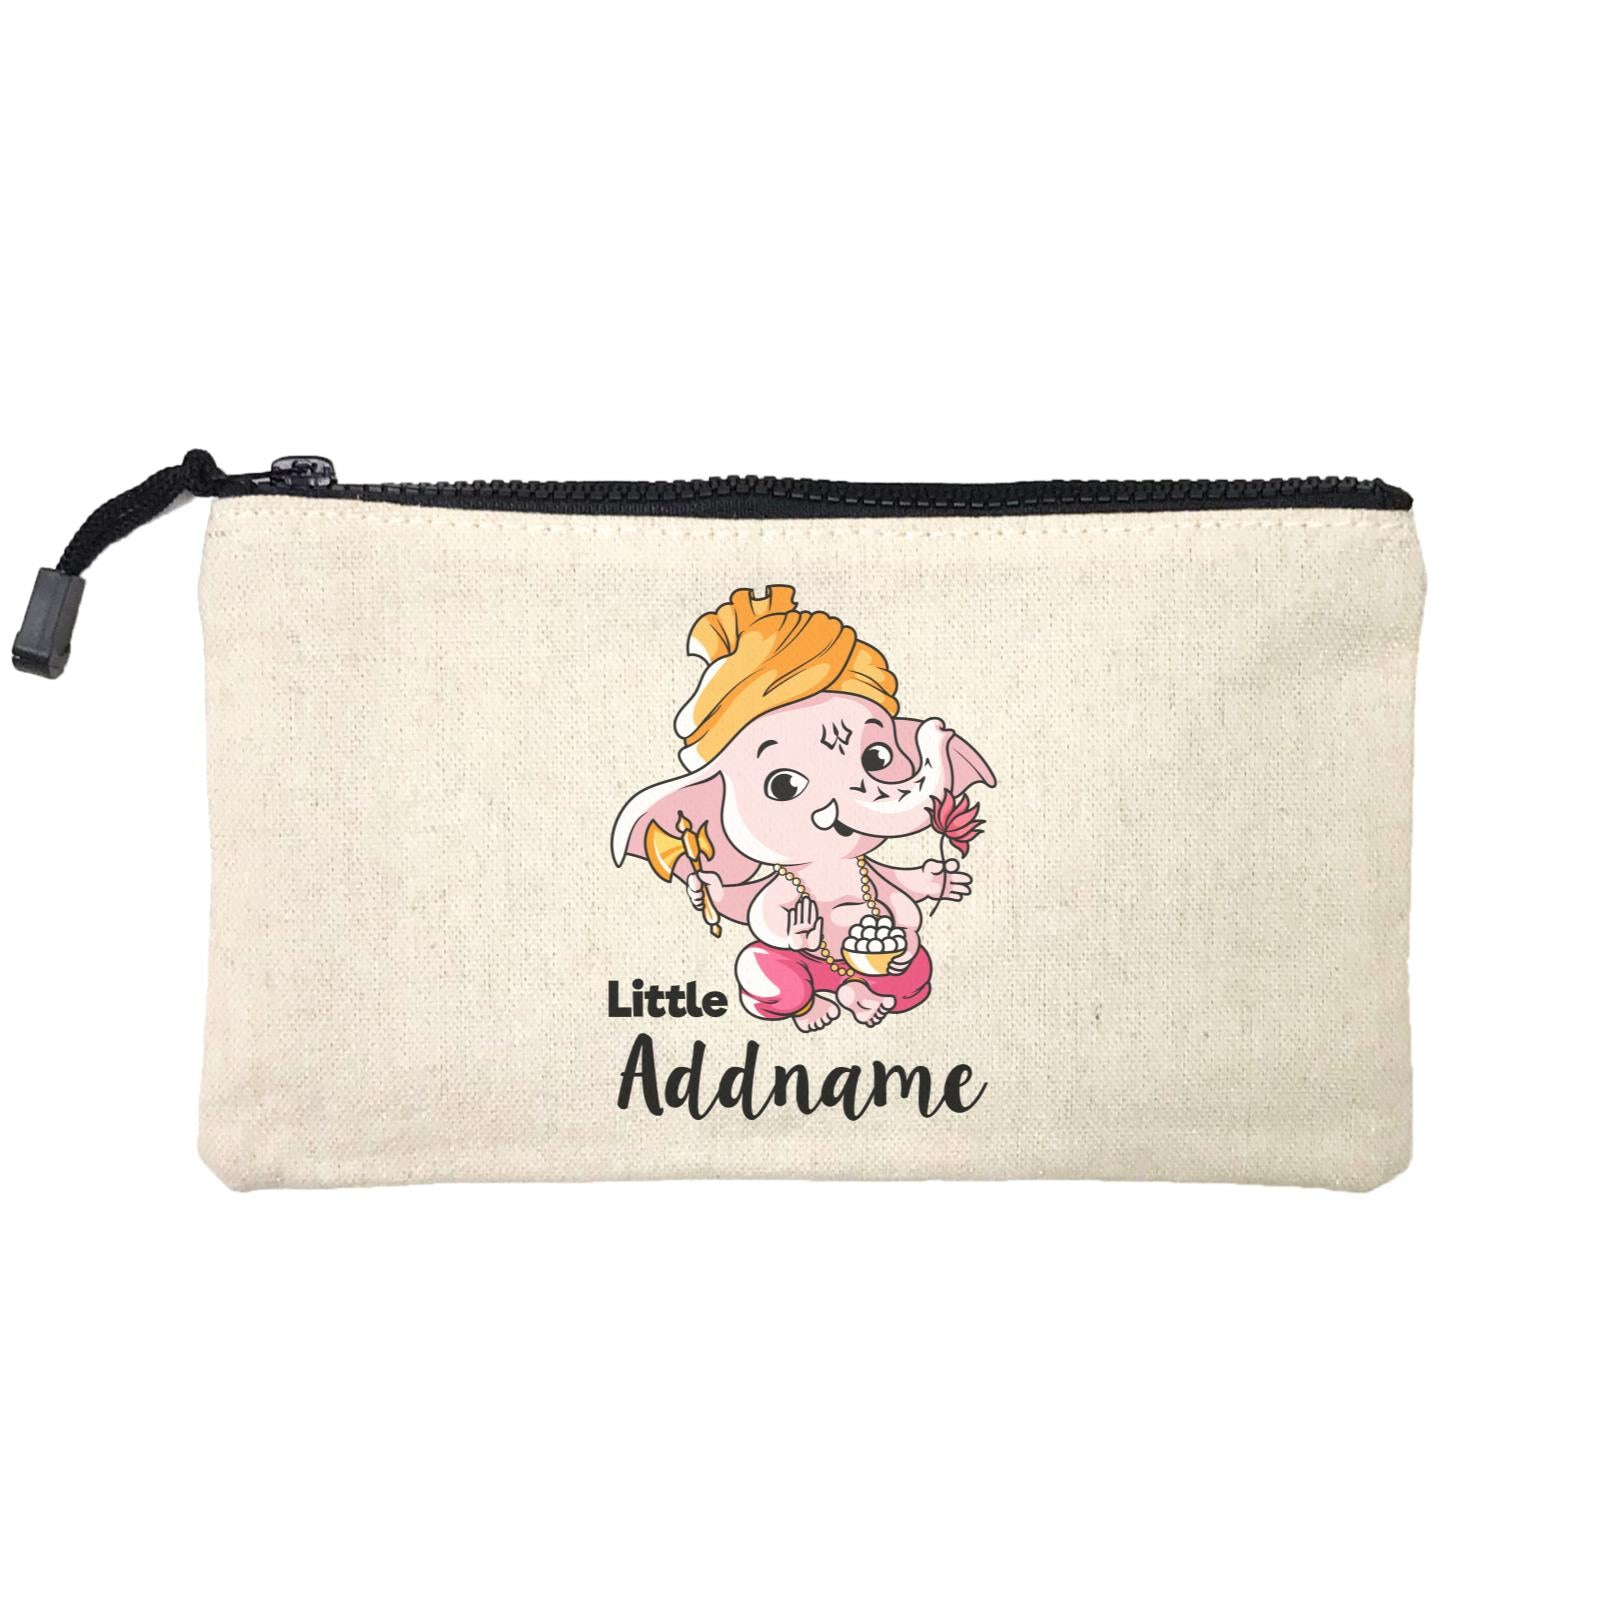 Cute Ganesha Little Addname Mini Accessories Stationery Pouch